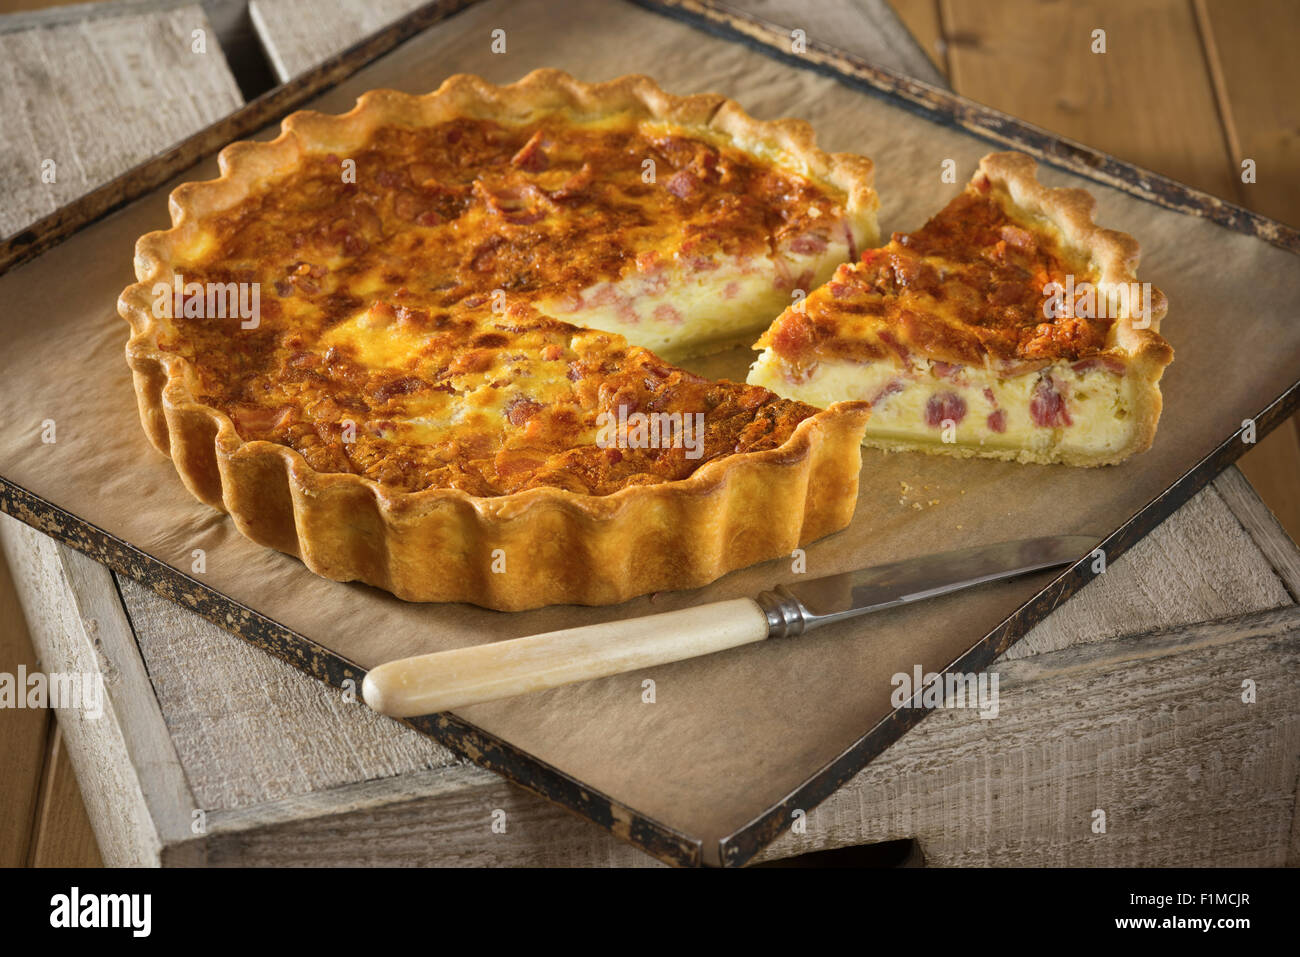 Quiche lorraine. French egg and bacon tart. France Food Stock Photo